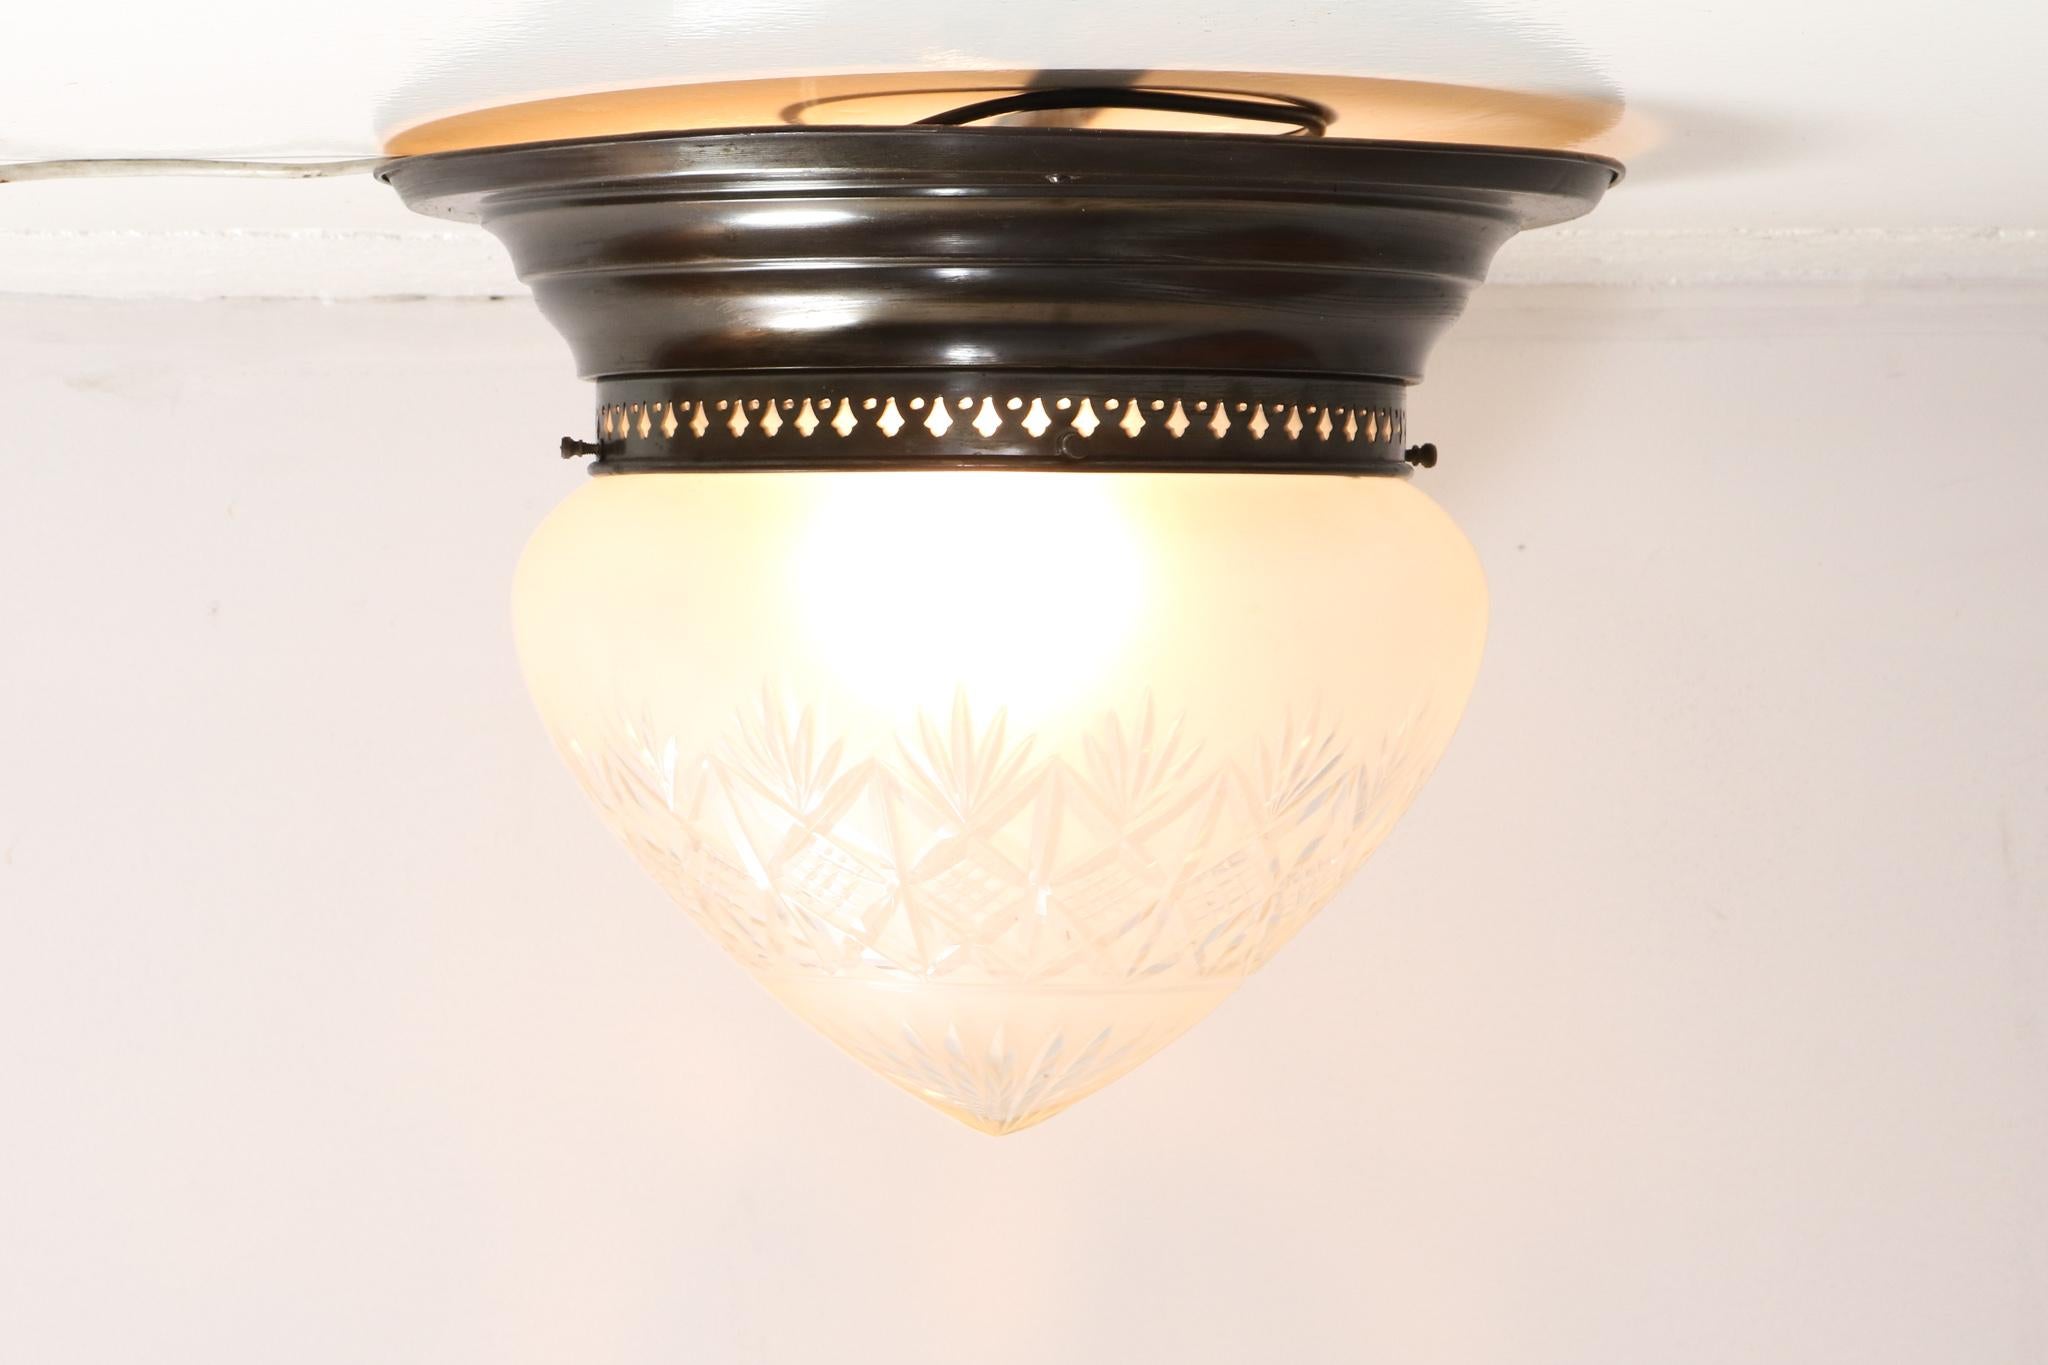 Magnificent French Art Nouveau brass cut blown glass flush mount large ceiling light.
Original shade and in very good condition with minor wear consistent with age and use, preserving a beautiful patina.
This wonderful Art Nouveau ceiling light is